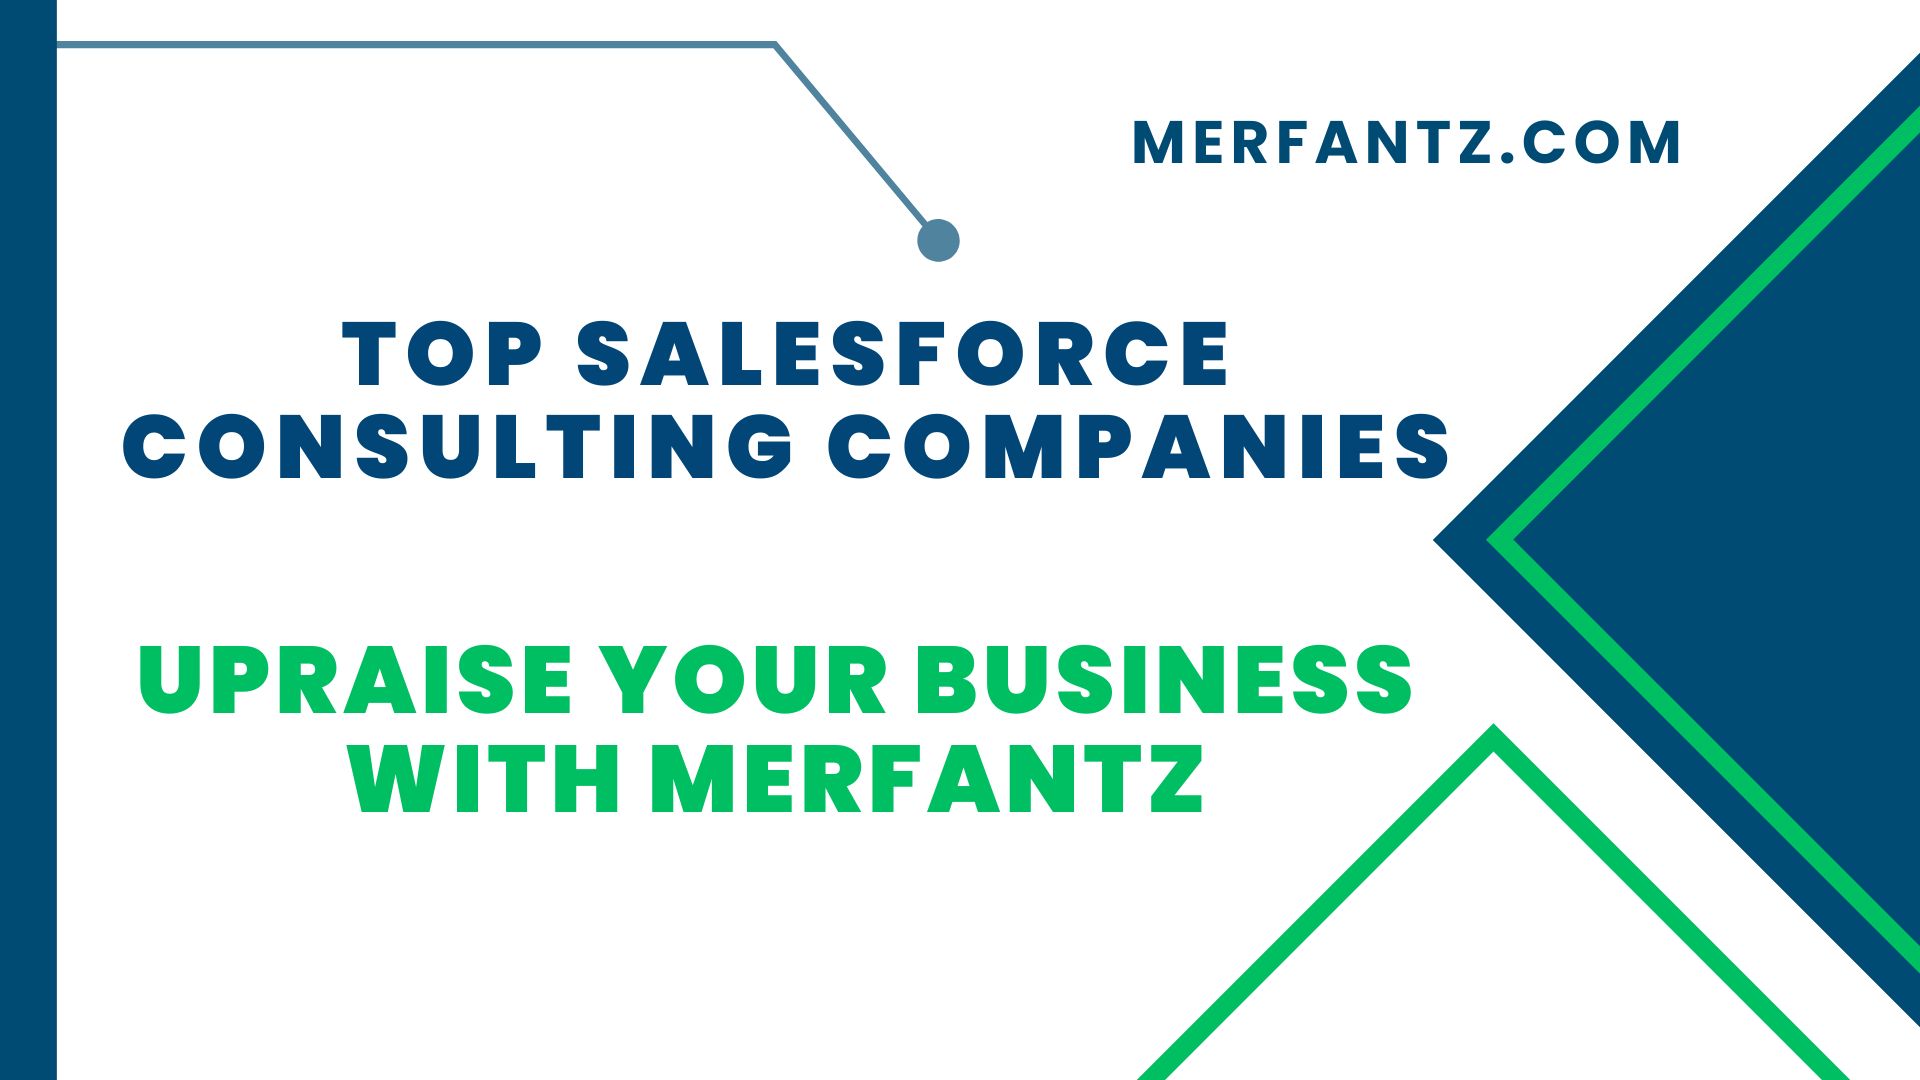 Top Salesforce Consulting Companies  Upraise Your Business with Merfantz